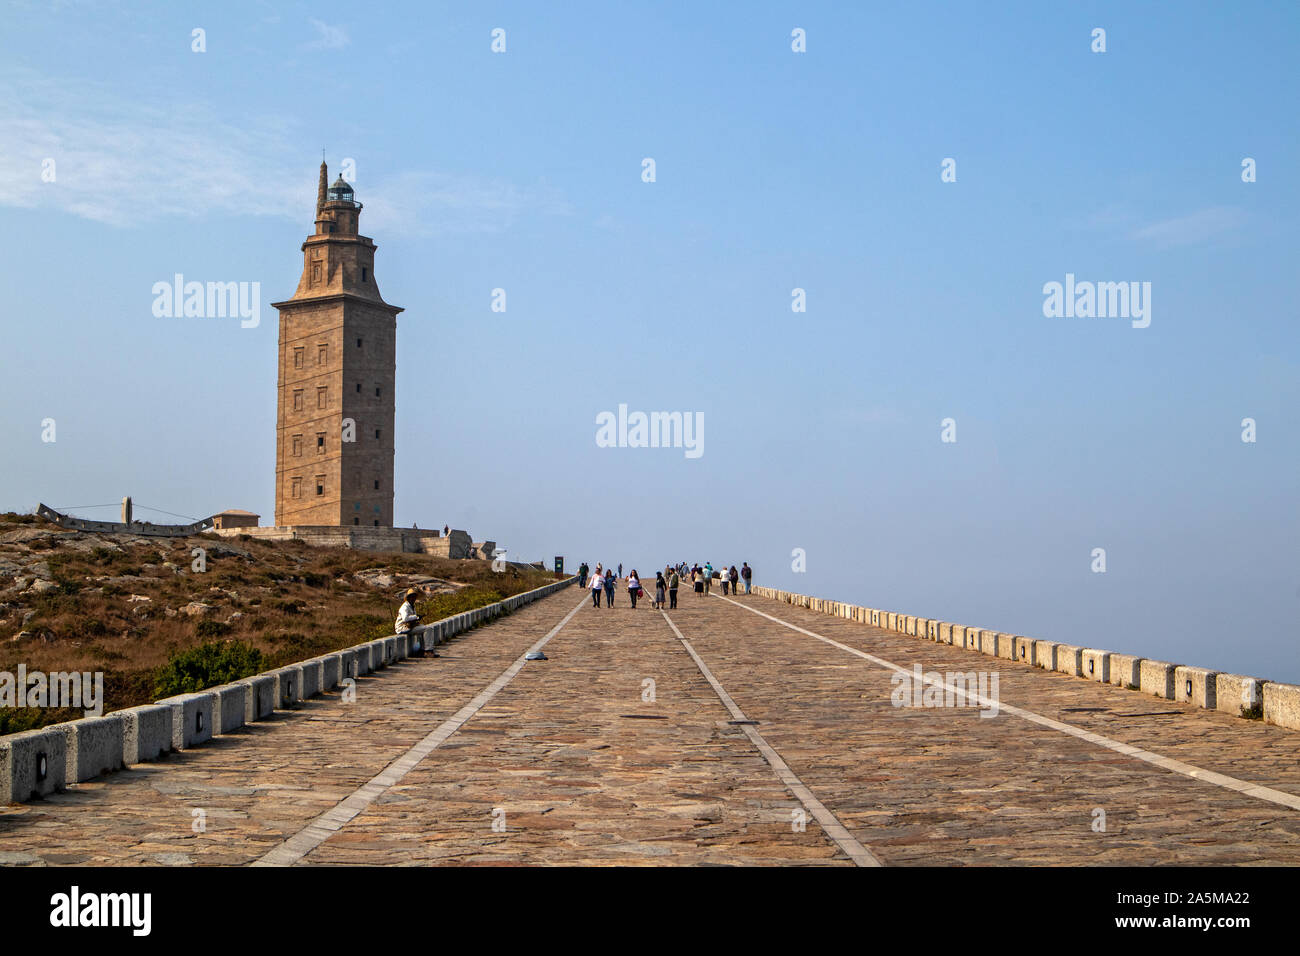 A Coruña, Spain - September 20, 2019: Ancient Roman lighthouse Tower of Hercules (Torre de Hércules) with a bright sky and with tourists visiting it Stock Photo